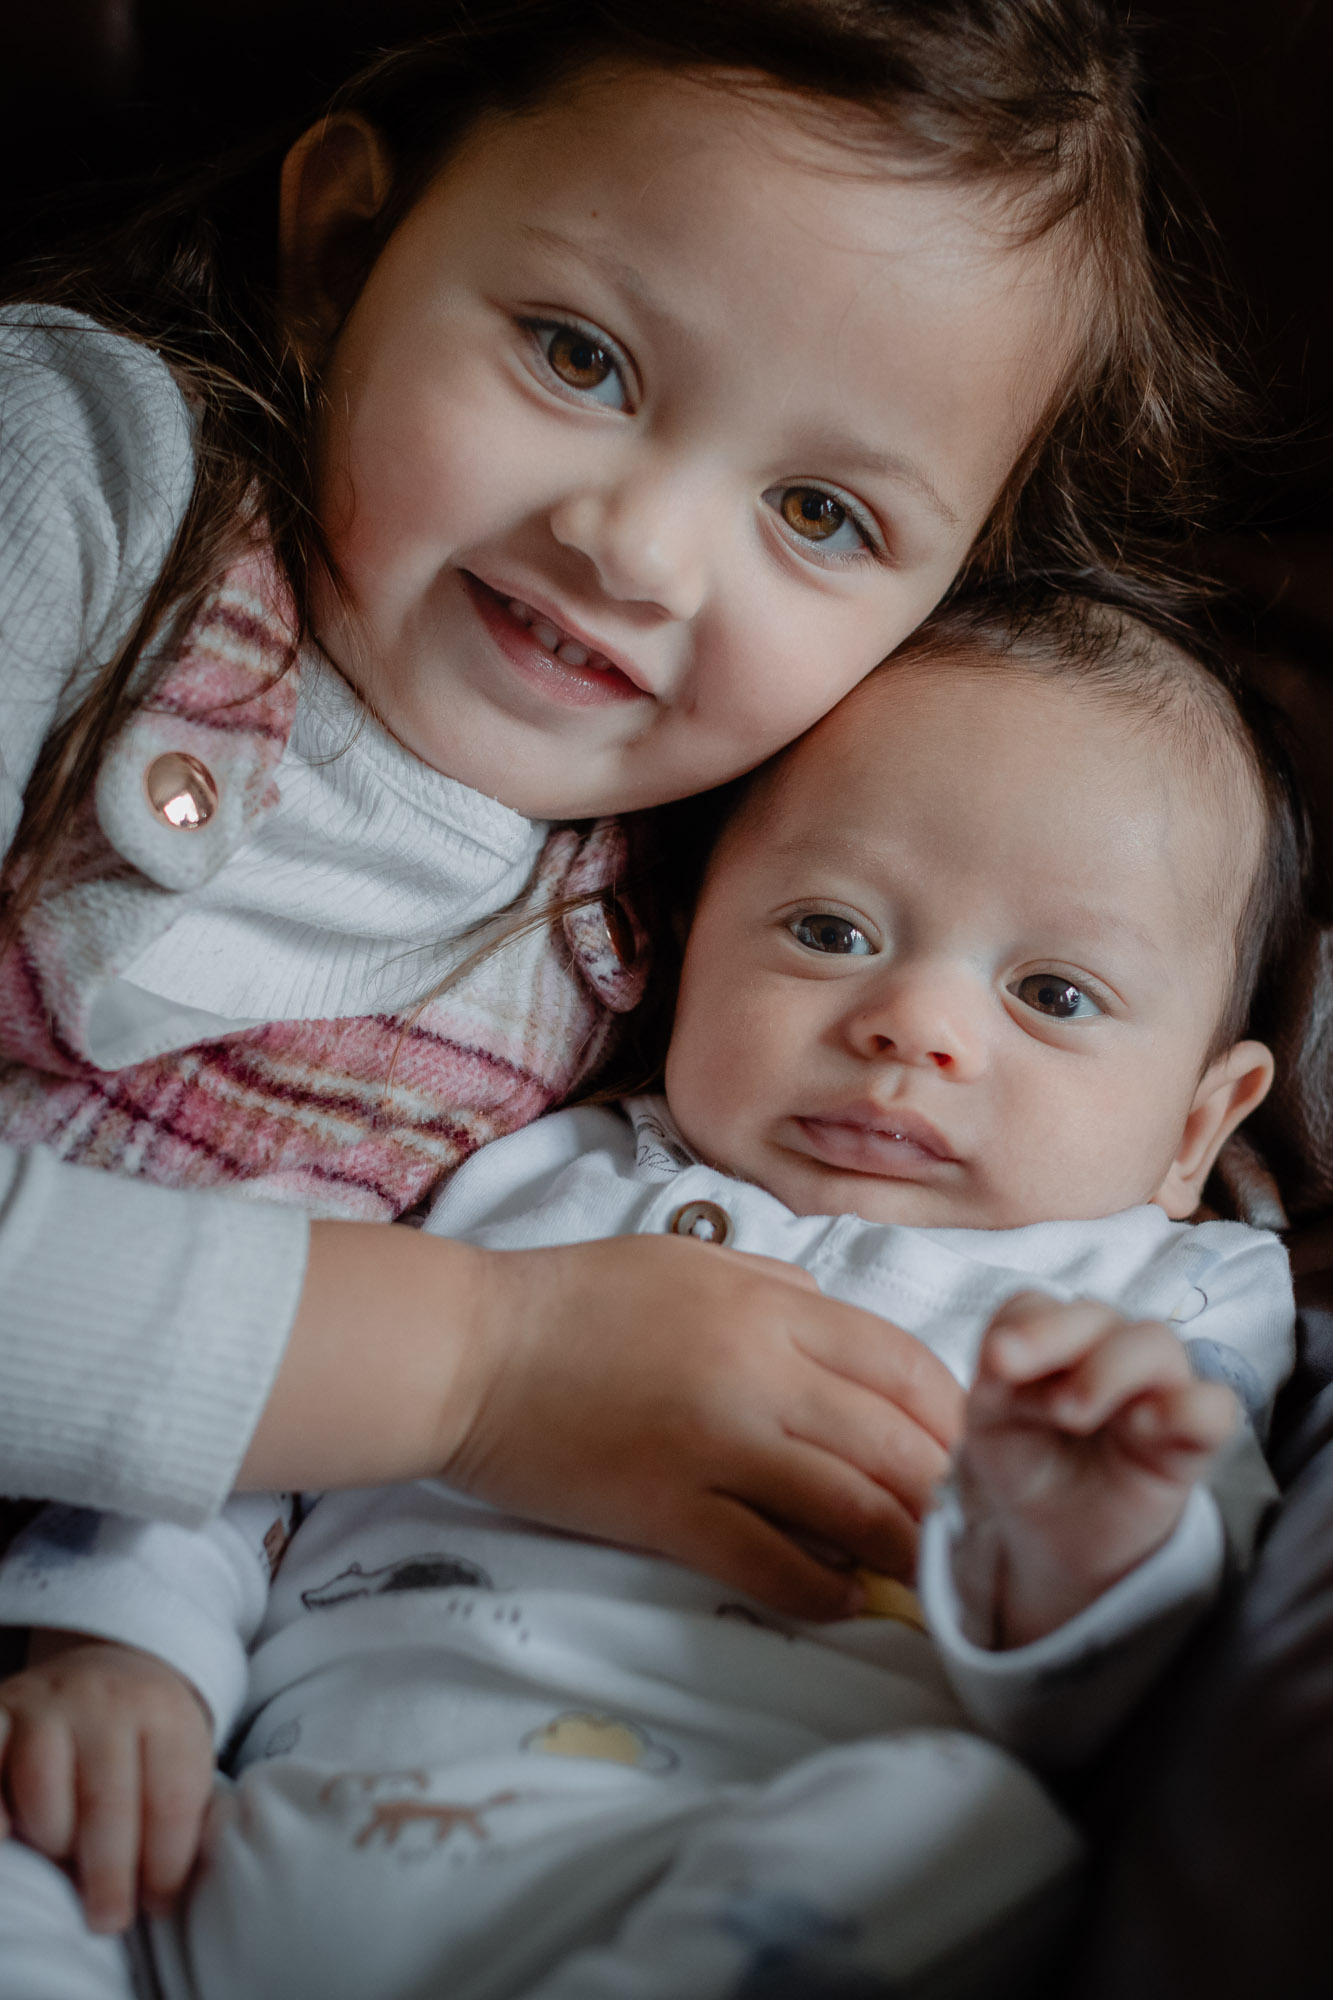 A little girl cuddled on a sofa with her baby brother, looking towards the camera and smiling on a baby photoshoot in Horsham, West Sussex.